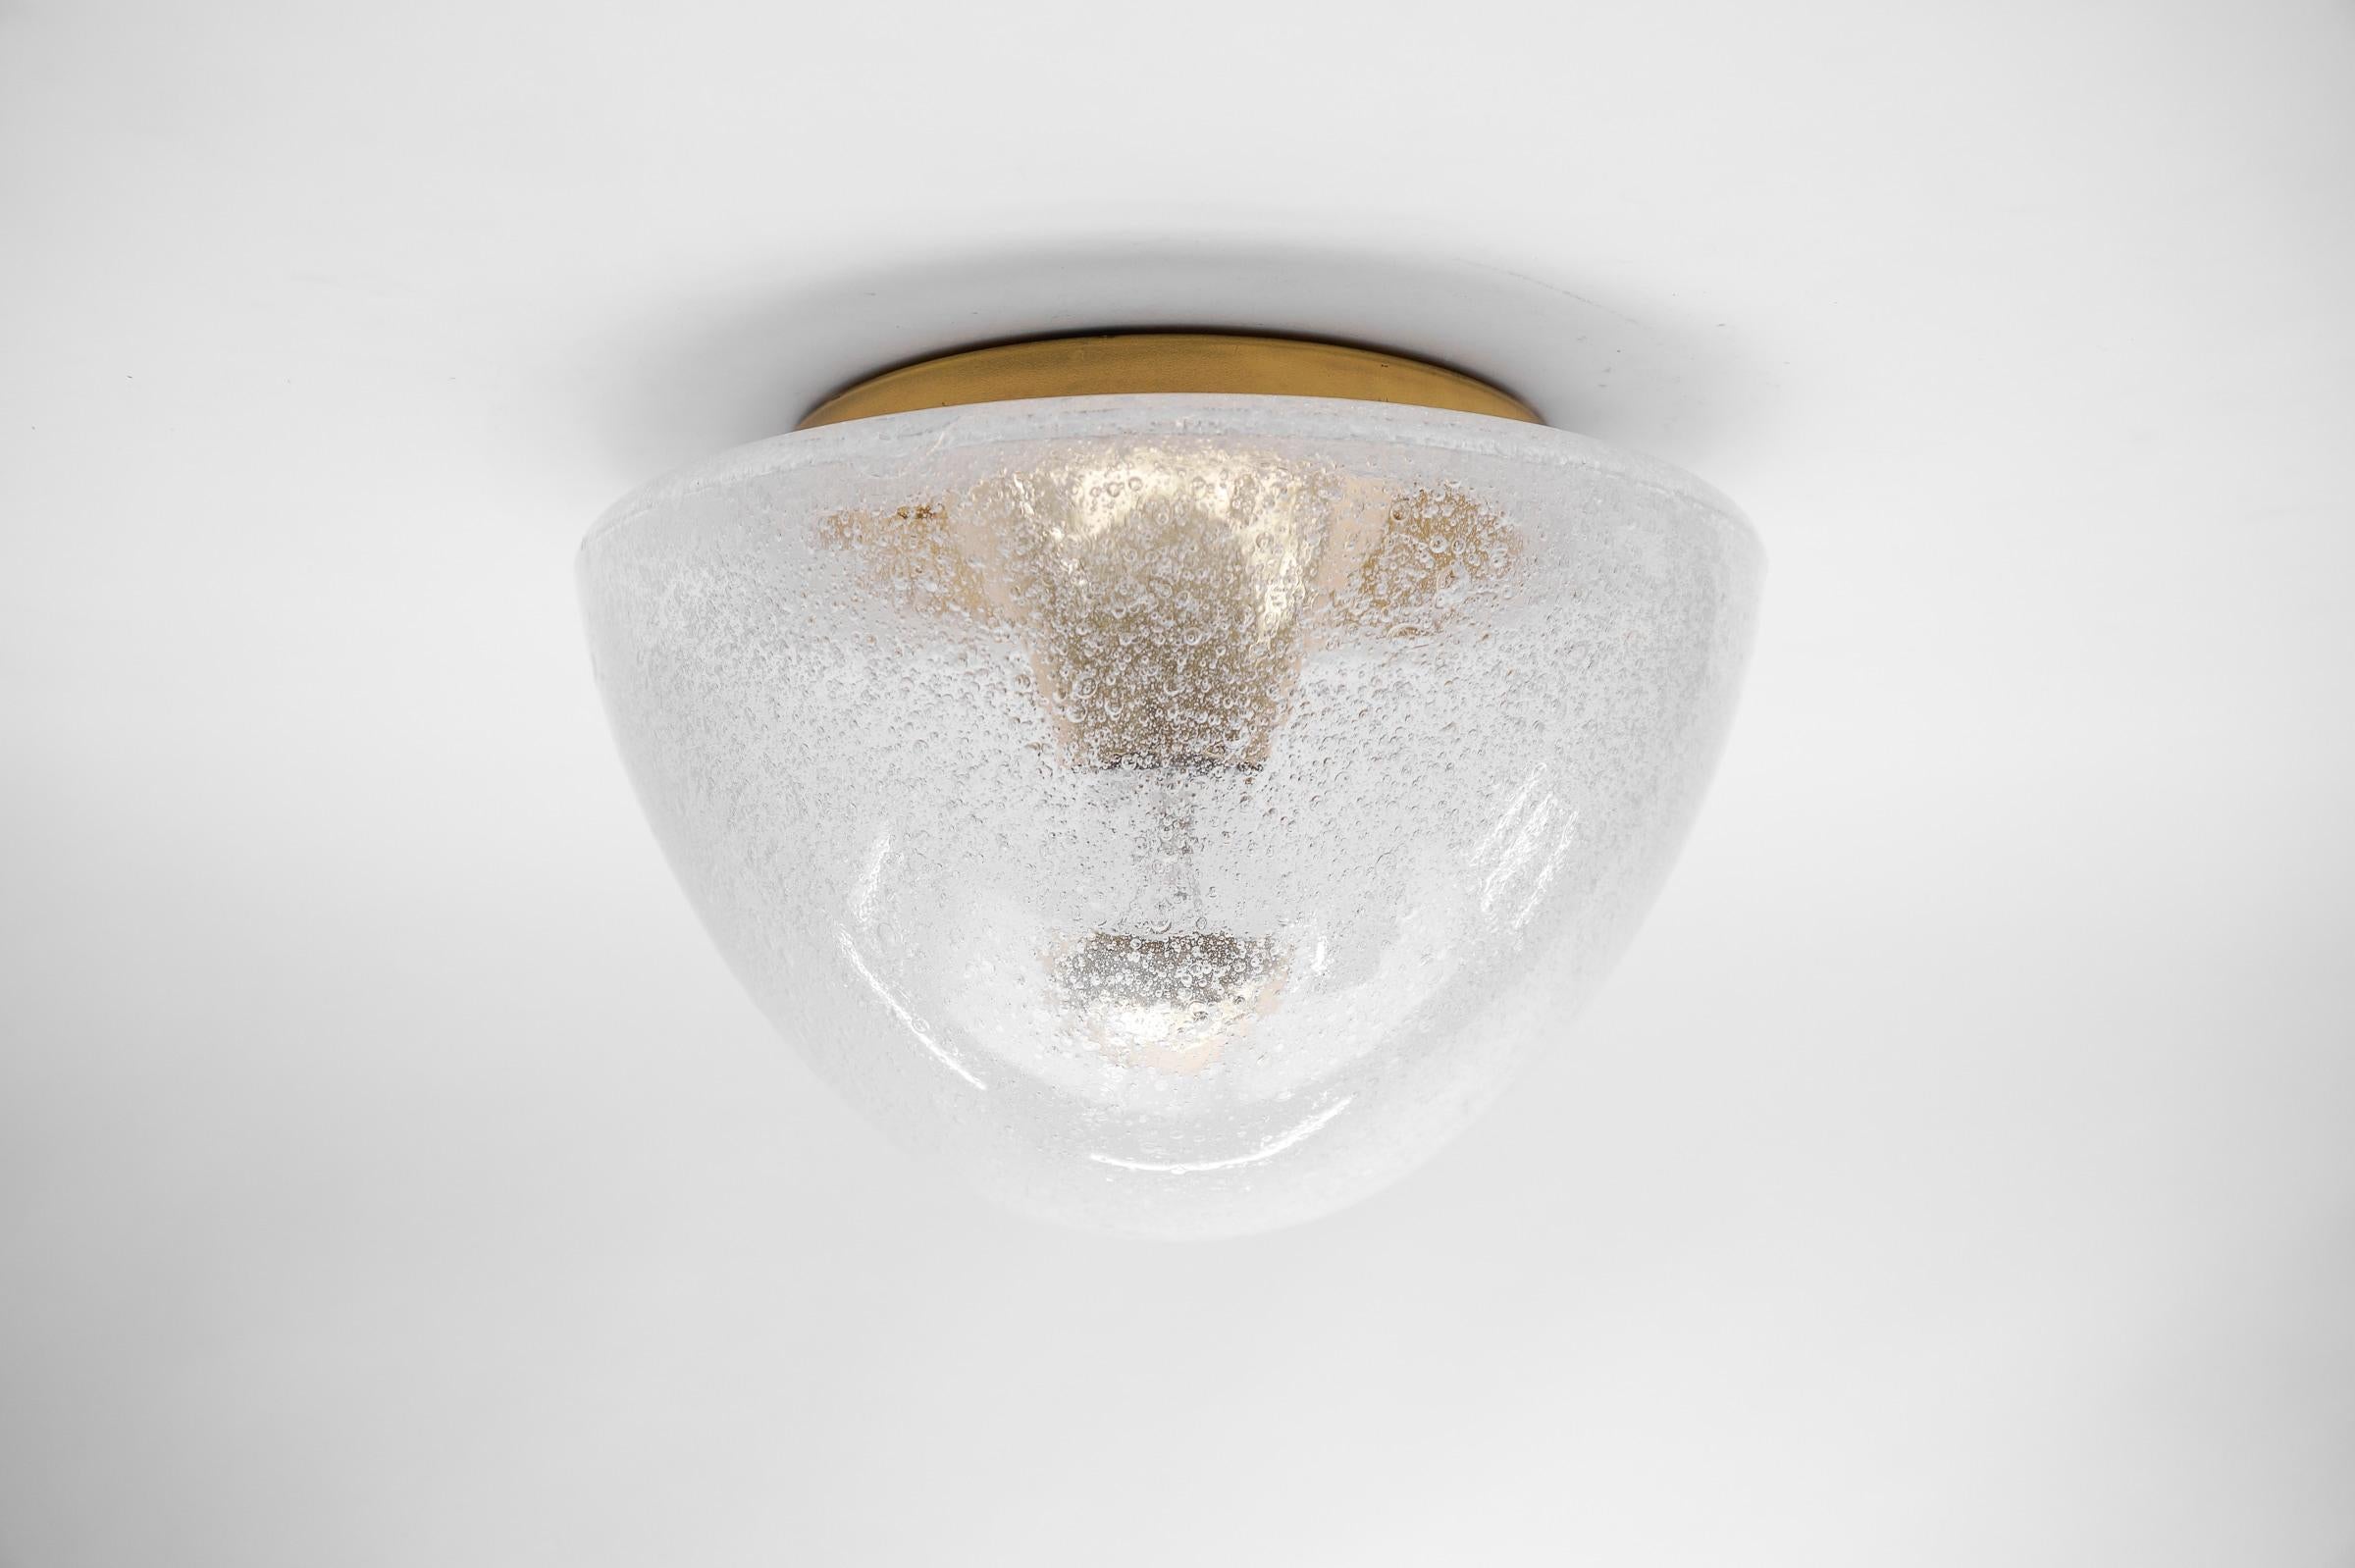 1 of 4 Mushroom Shaped Glass Lamp in Gold, Germany 1960s

Dimensions
Height: 7.08 in. (18 cm)
Diameter: 10.23 in. (26 cm)

The fixture need 1 x E27 standard bulb with 60W max.

Light bulbs are not included.
It is possible to install this fixture in